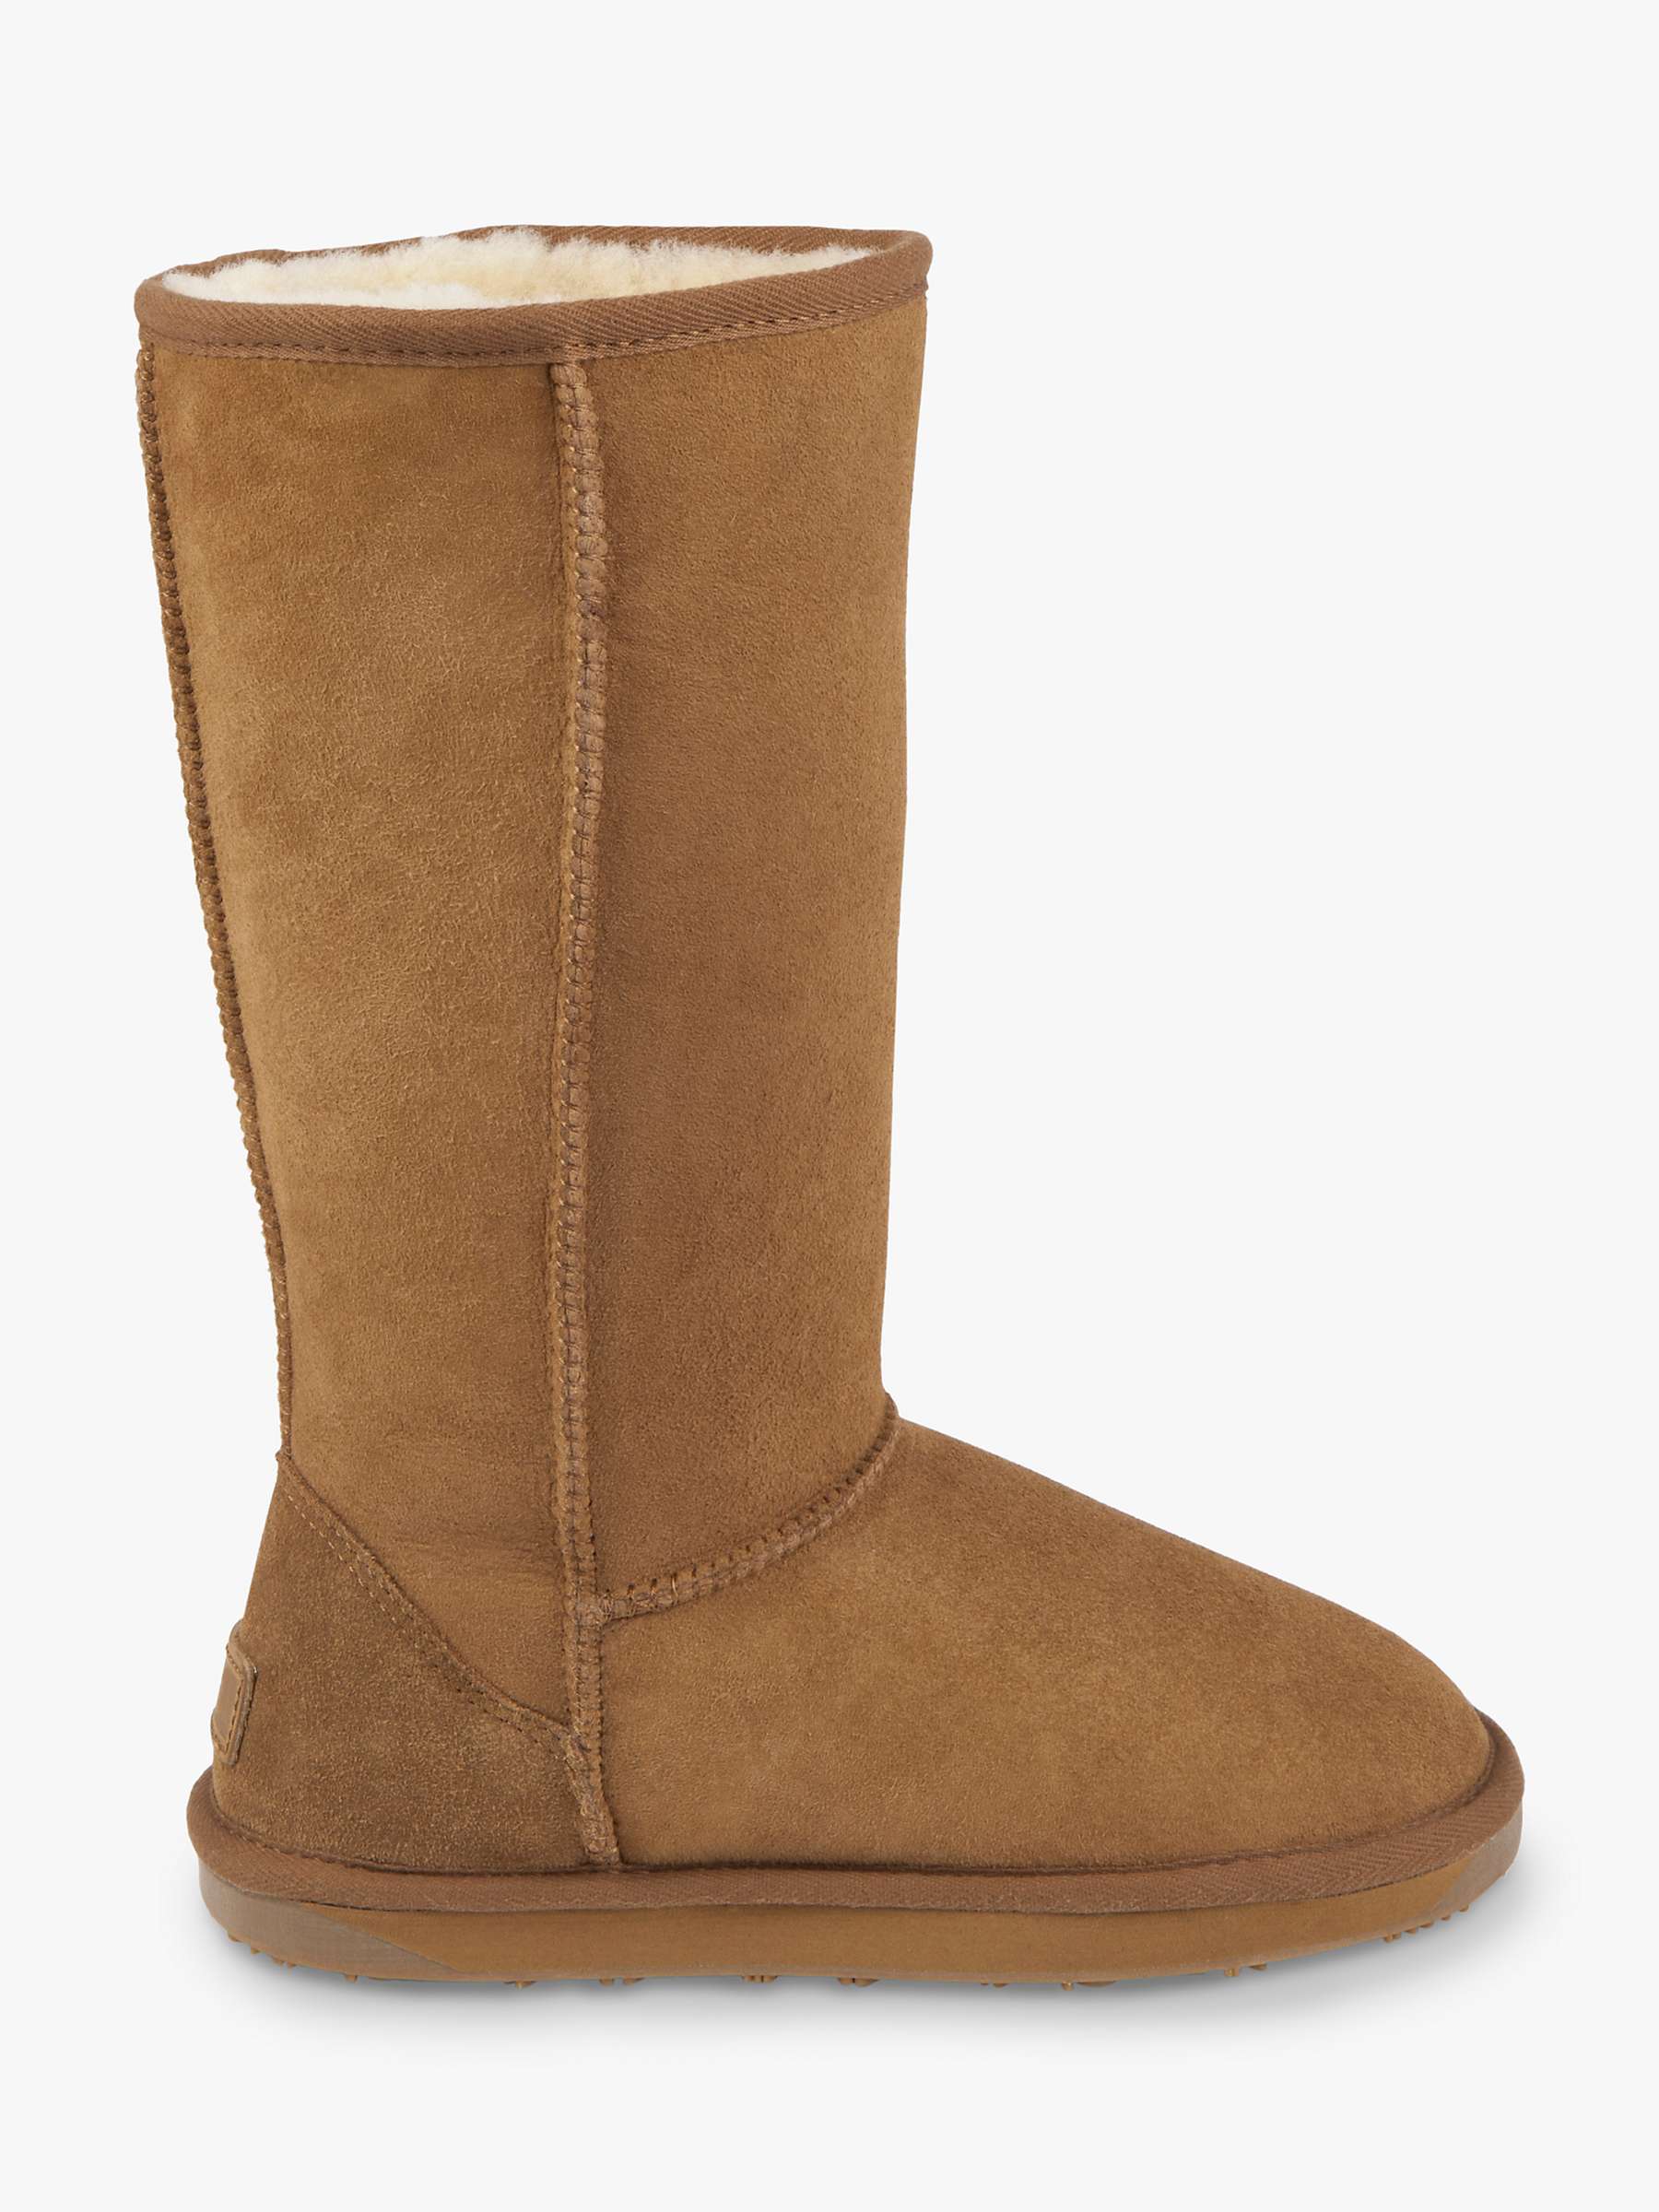 Buy Just Sheepskin Tall Classic Boots, Chestnut Online at johnlewis.com